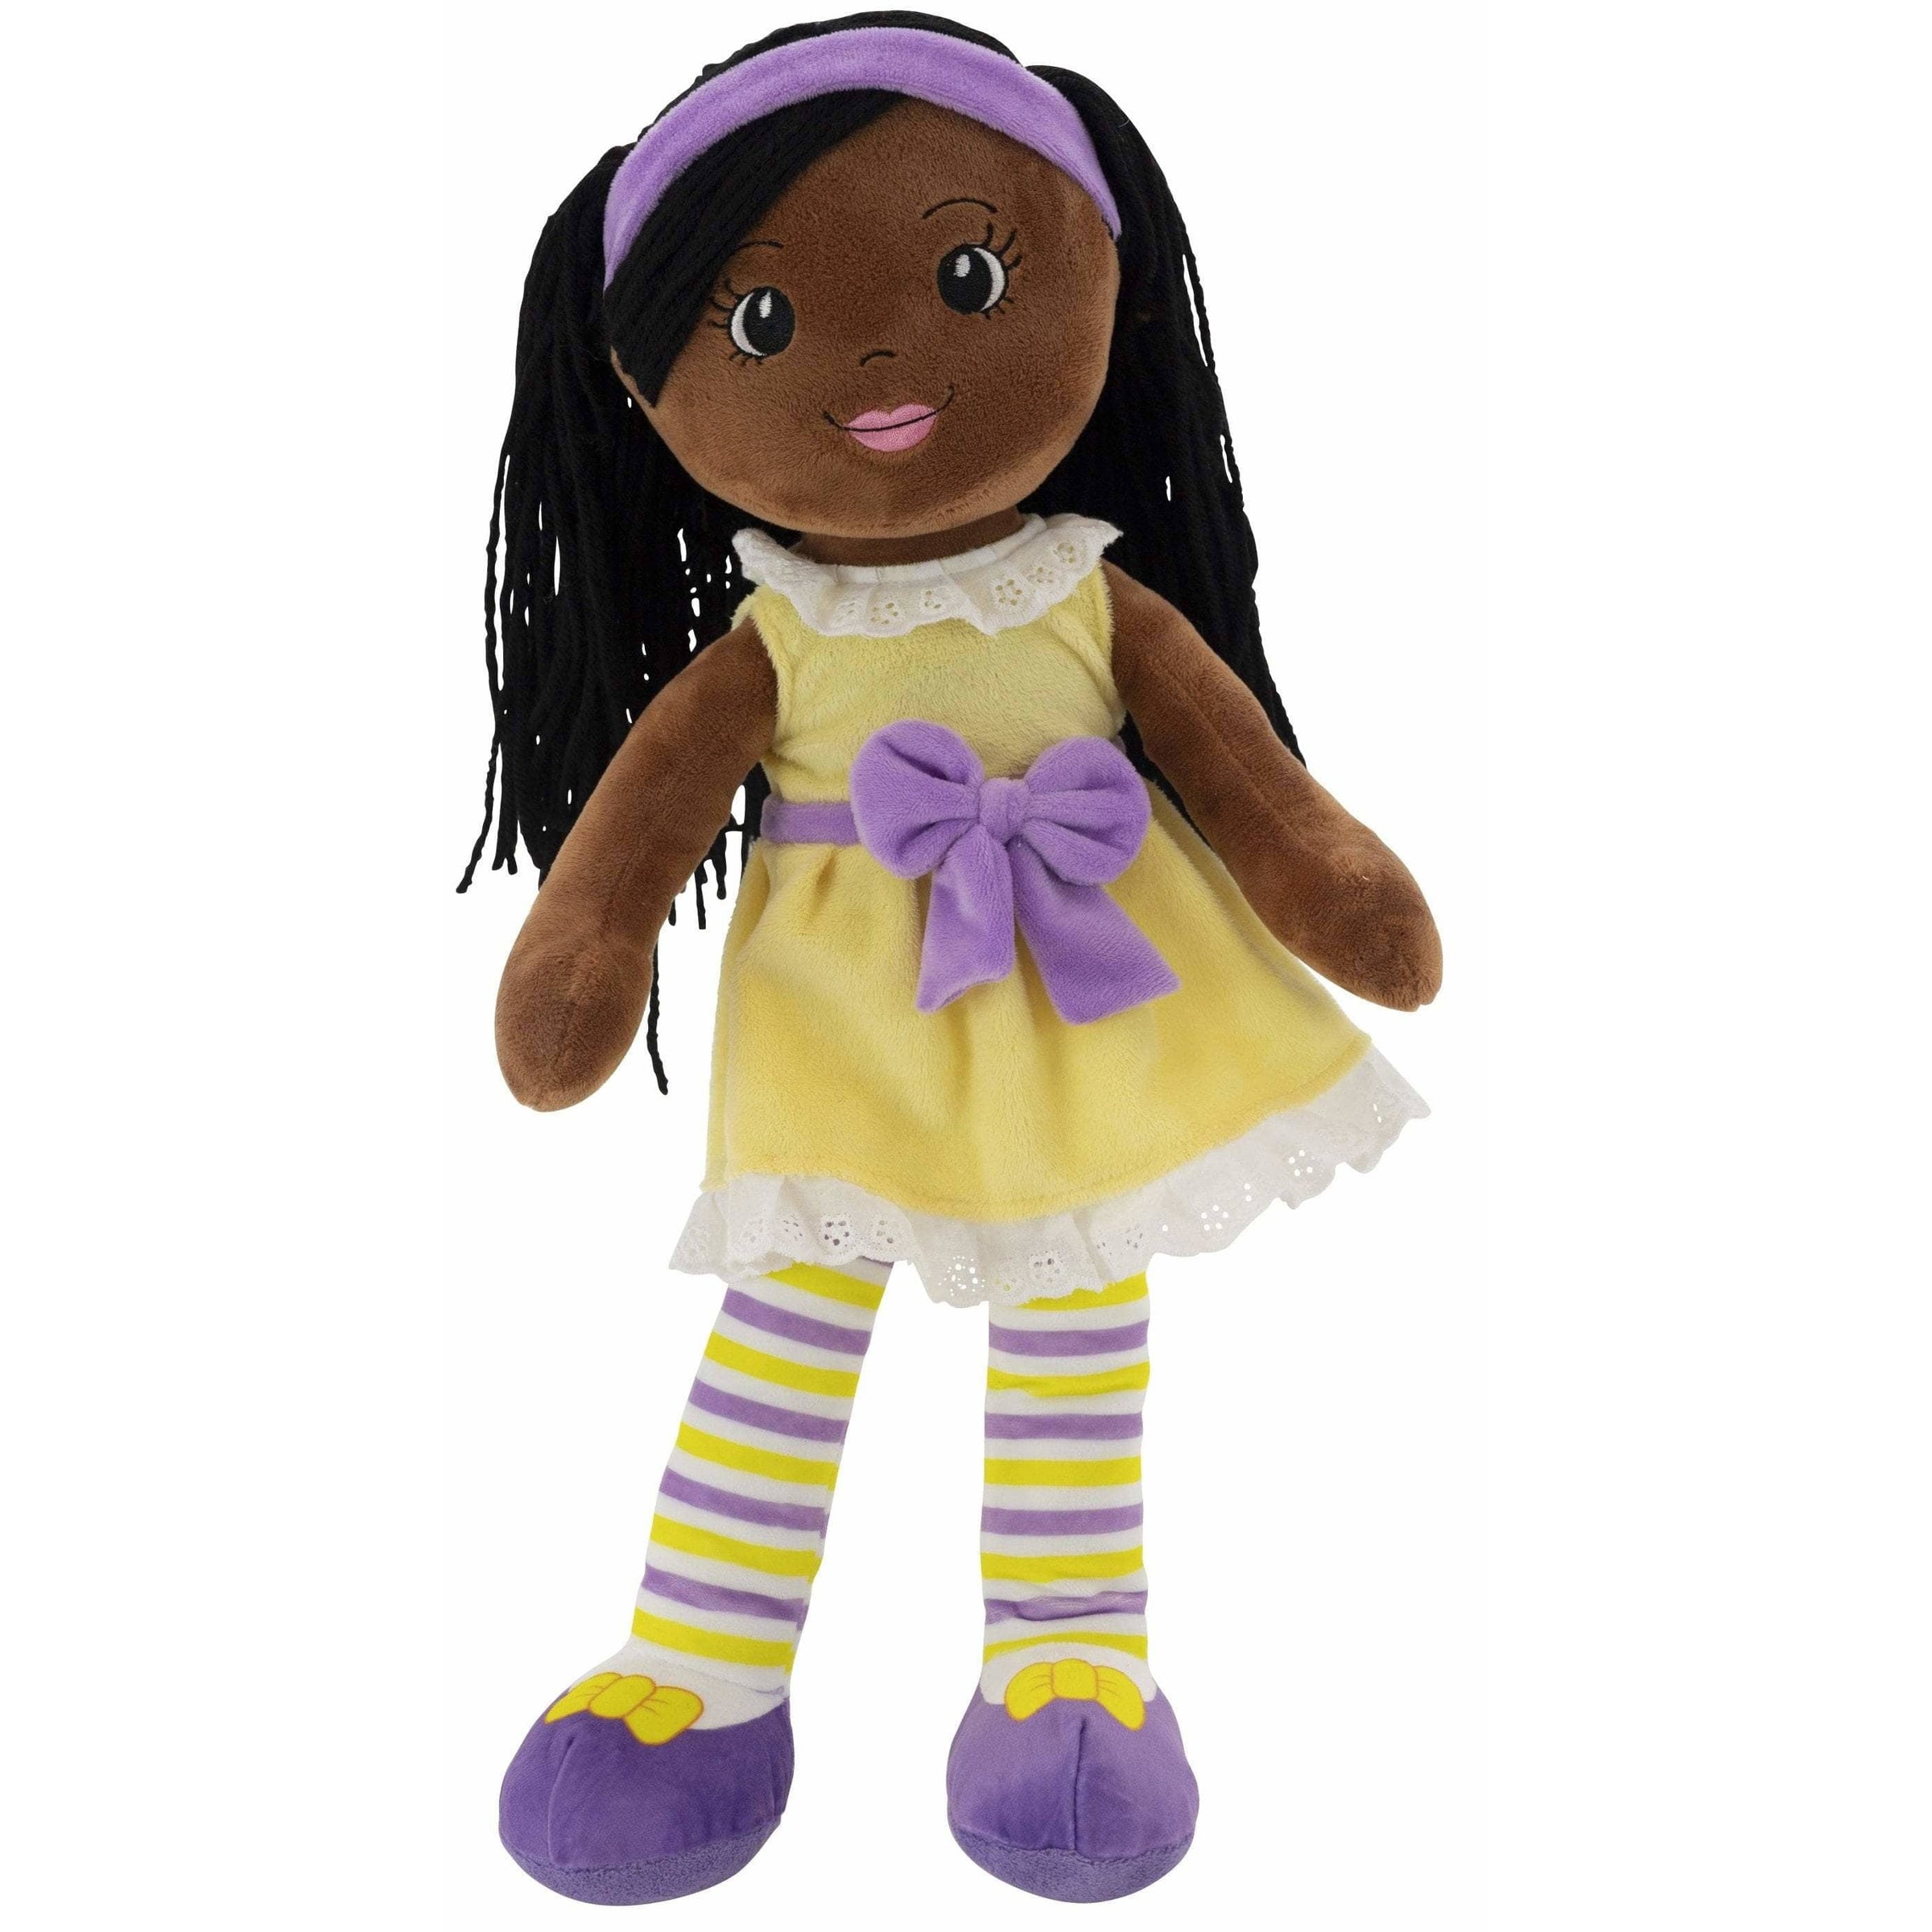 Playtime by Eimmie Plush Baby Doll - 14 Inch African American Rag Dolls for Girls, Infants, Toddlers, & Babies - Babys First Soft Fabric Body Girl Dolls - Black Yarn Hair - Small Plushie Toys - Kaylie